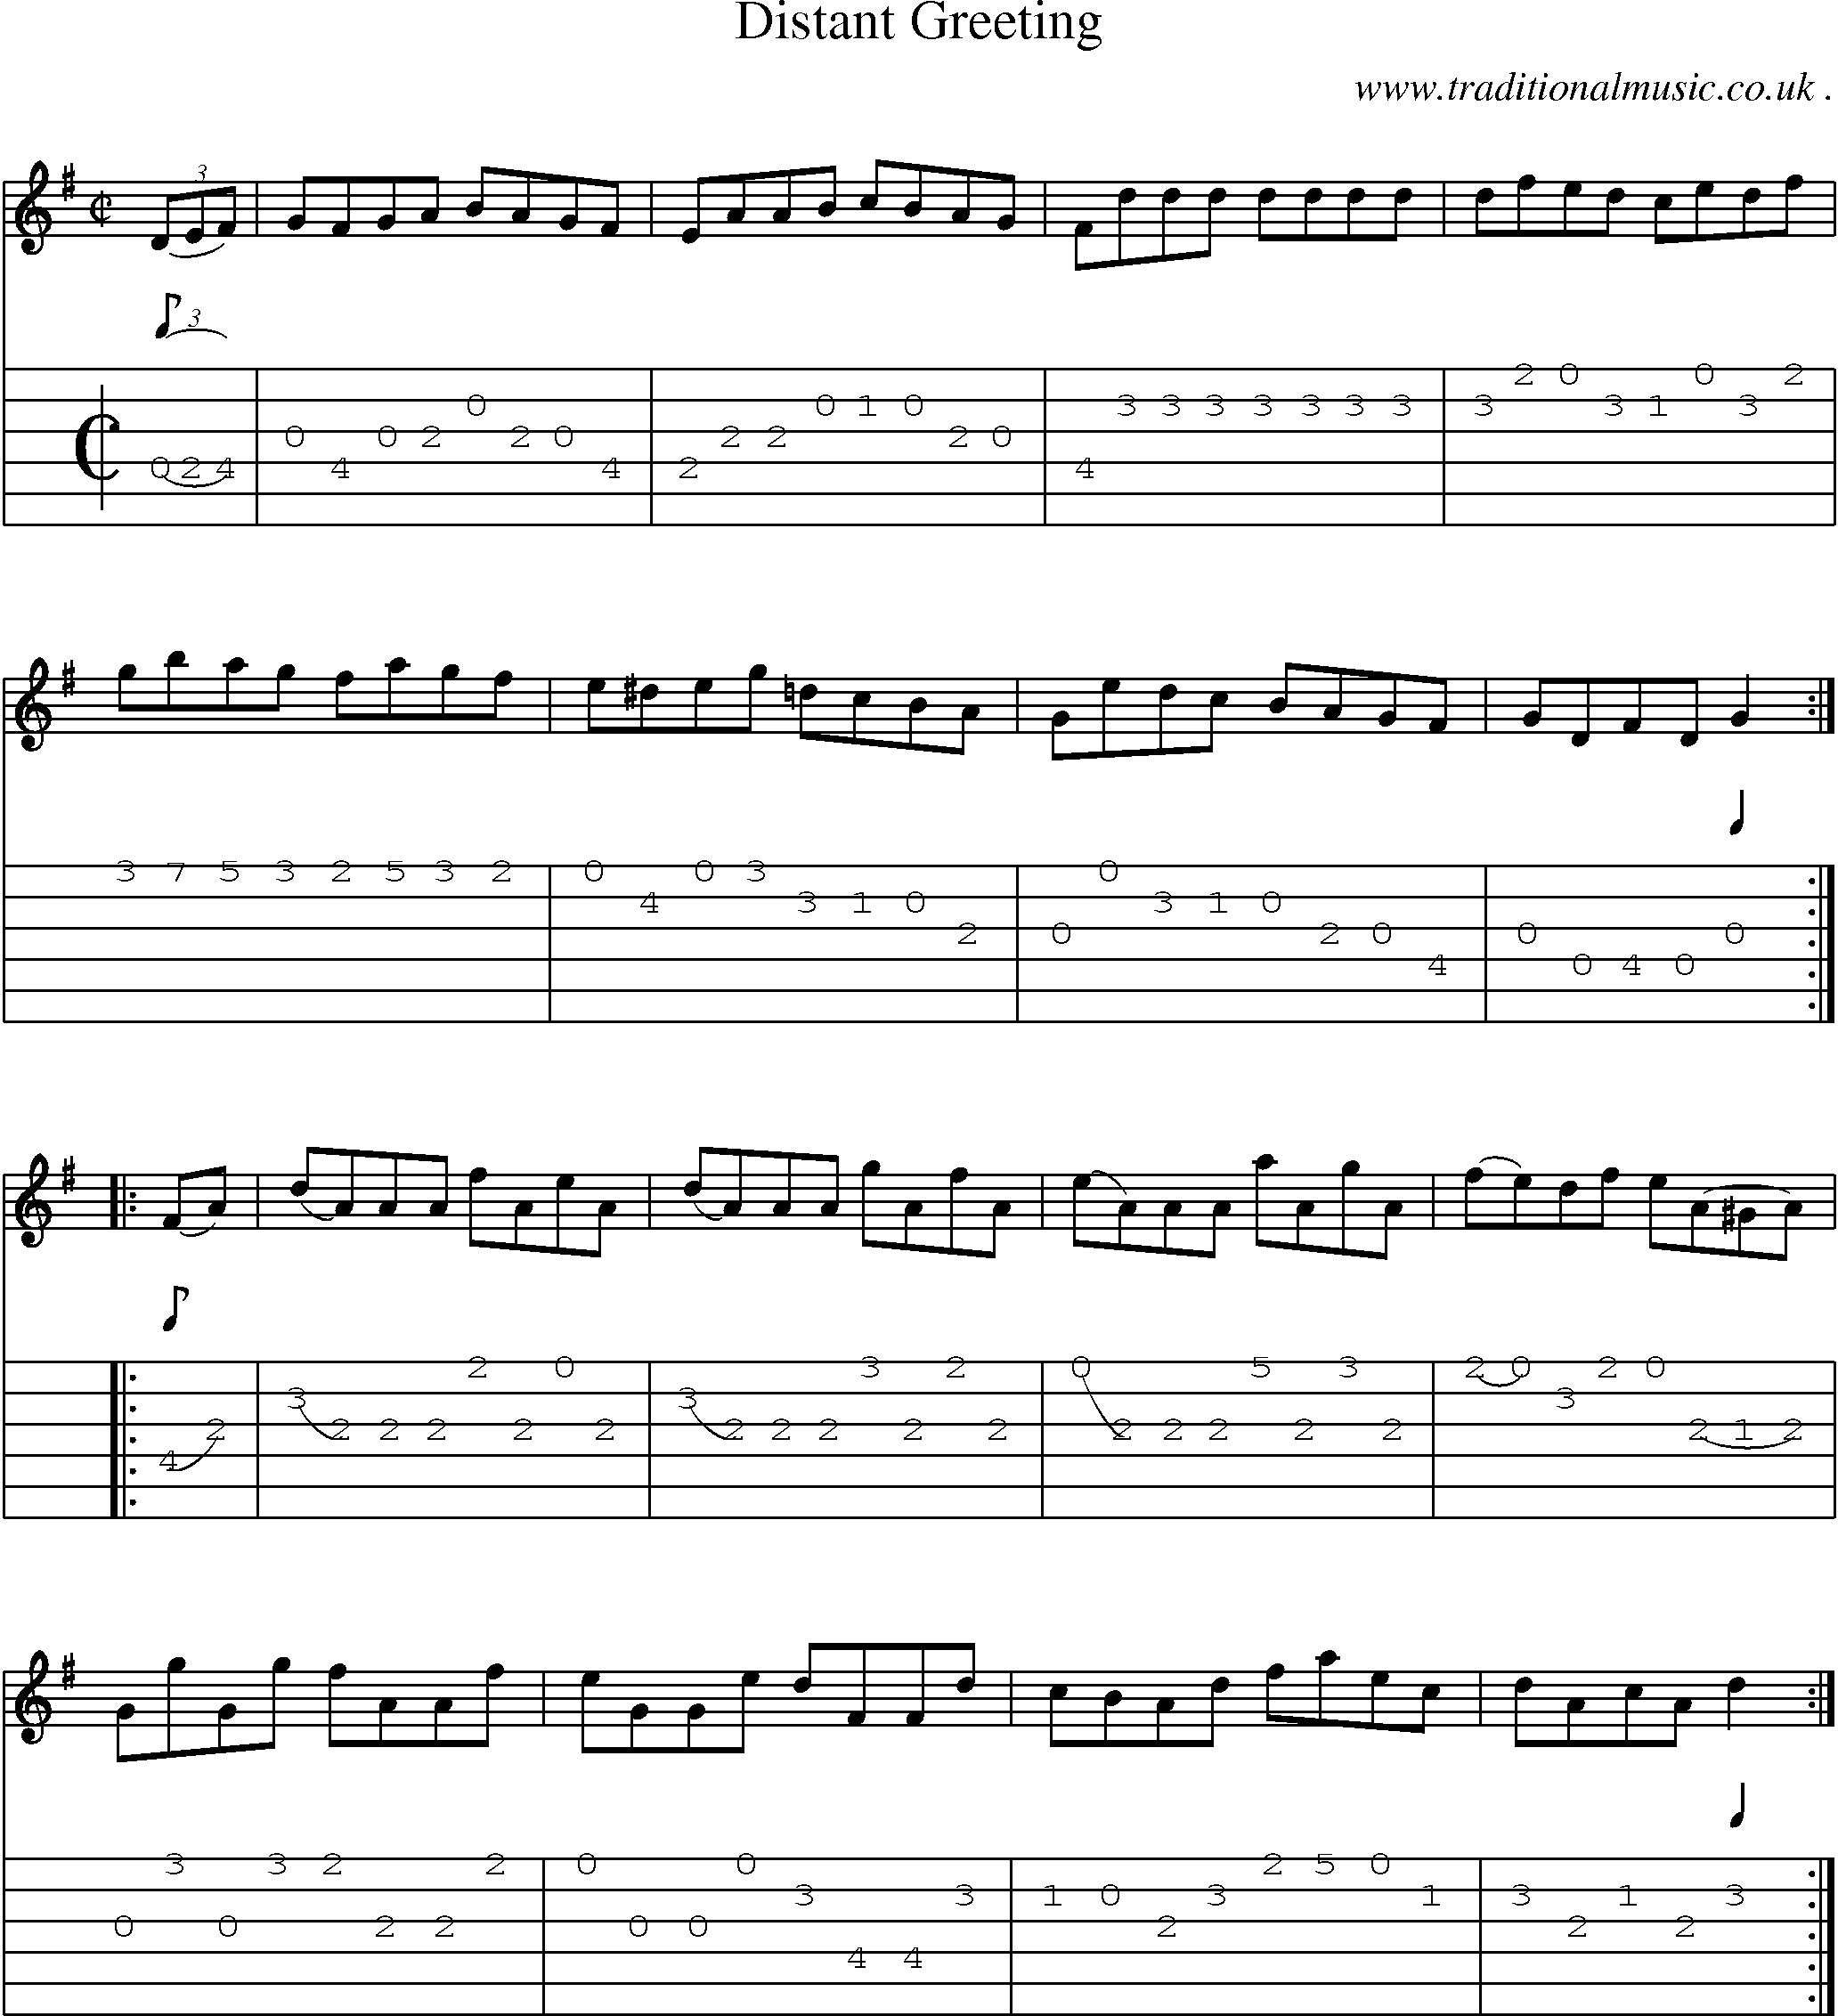 Sheet-Music and Guitar Tabs for Distant Greeting